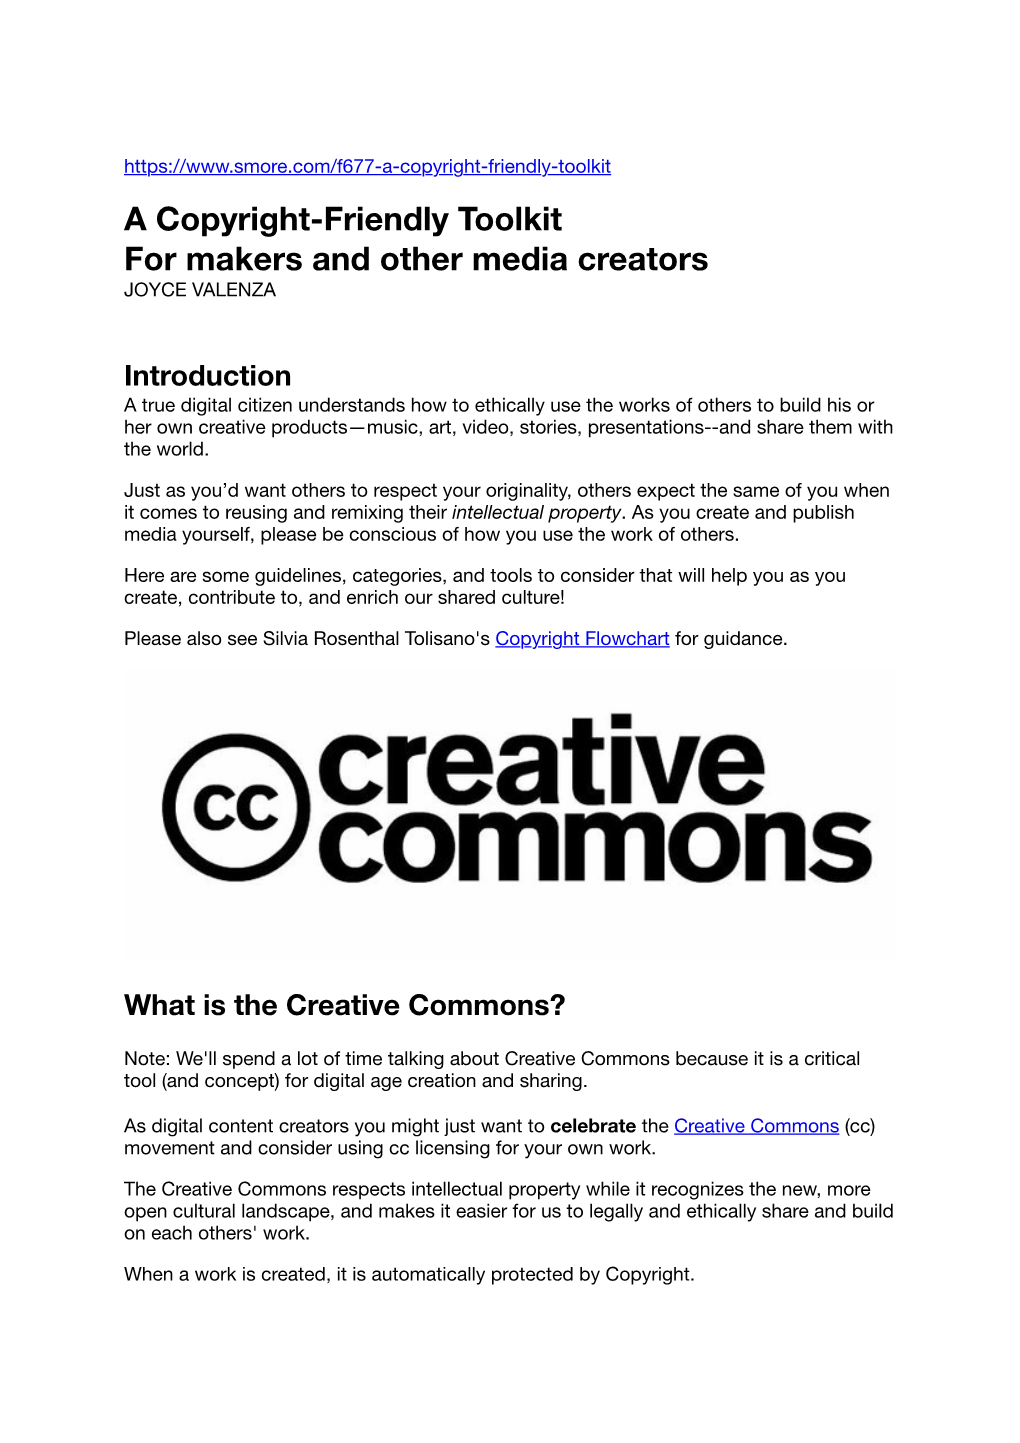 A Copyright-Friendly Toolkit for Makers and Other Media Creators JOYCE VALENZA